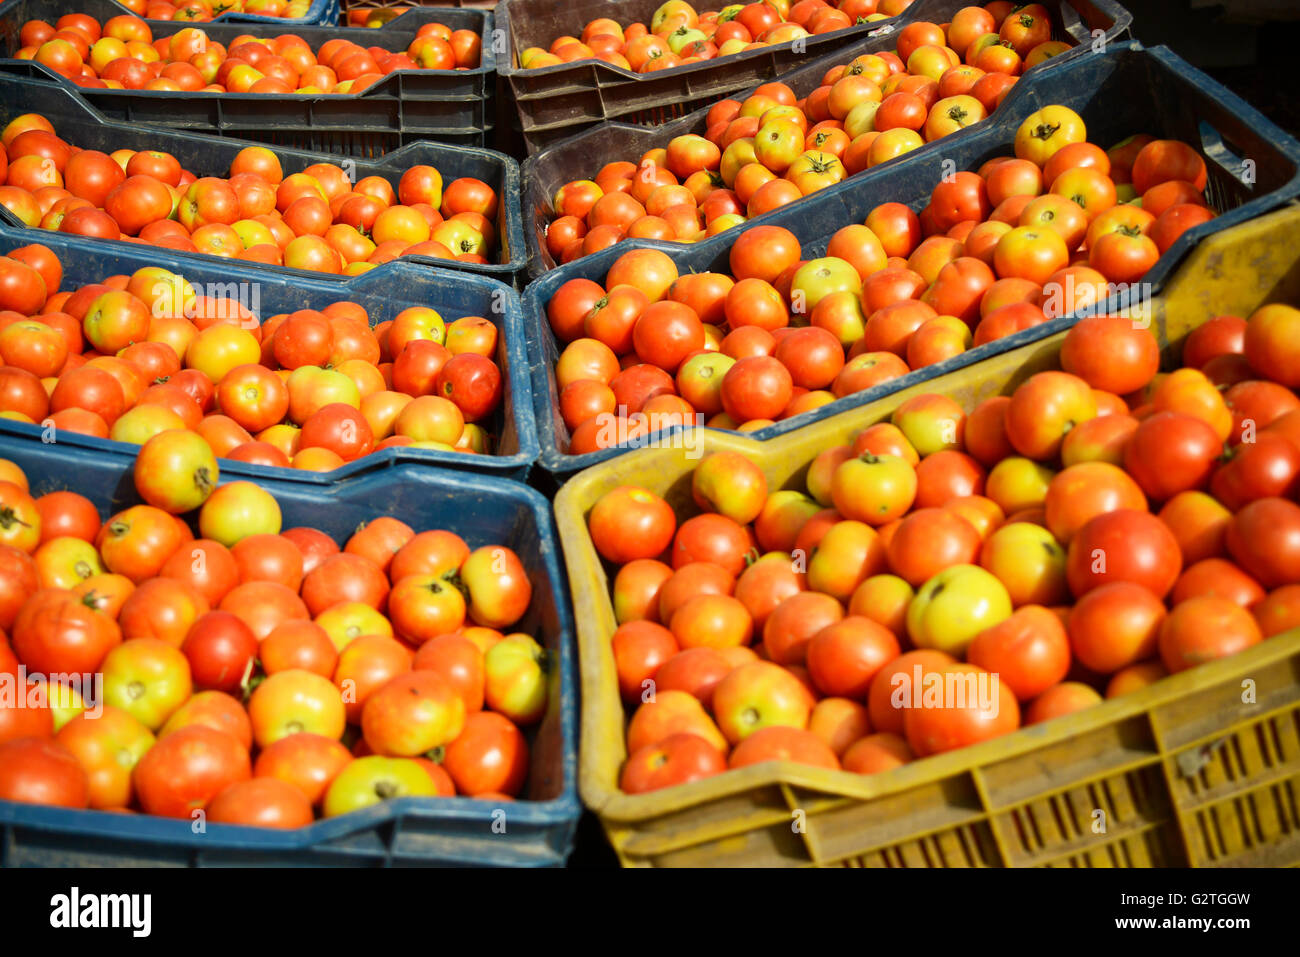 Tomato on sales at Indian local market Stock Photo